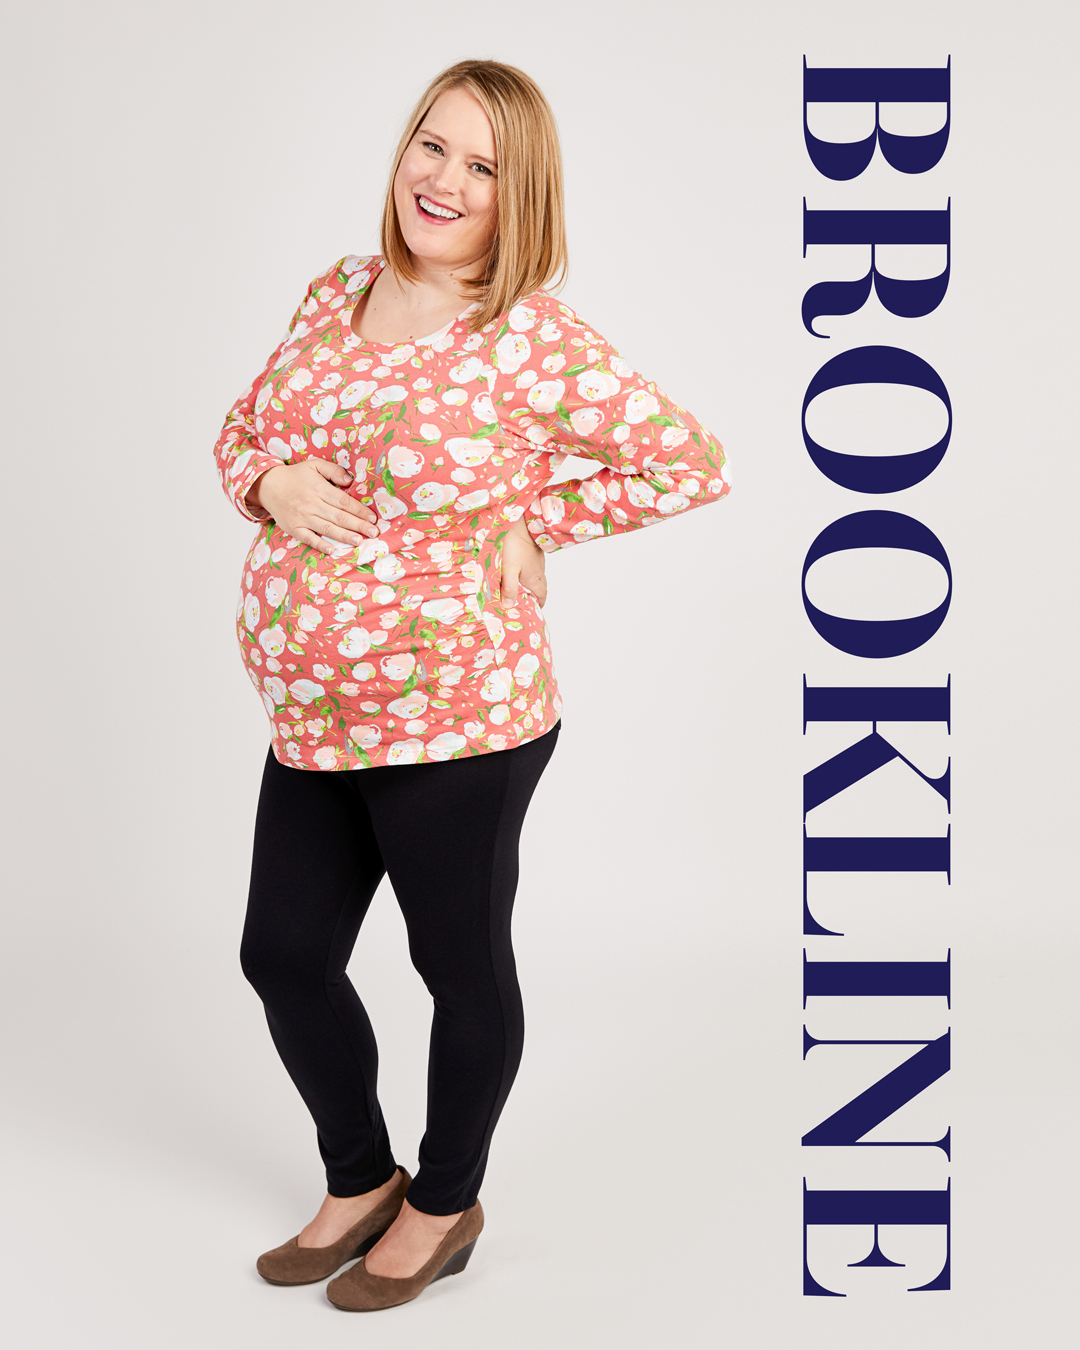 Introducing the Brookline Maternity T-Shirt and the Nursing